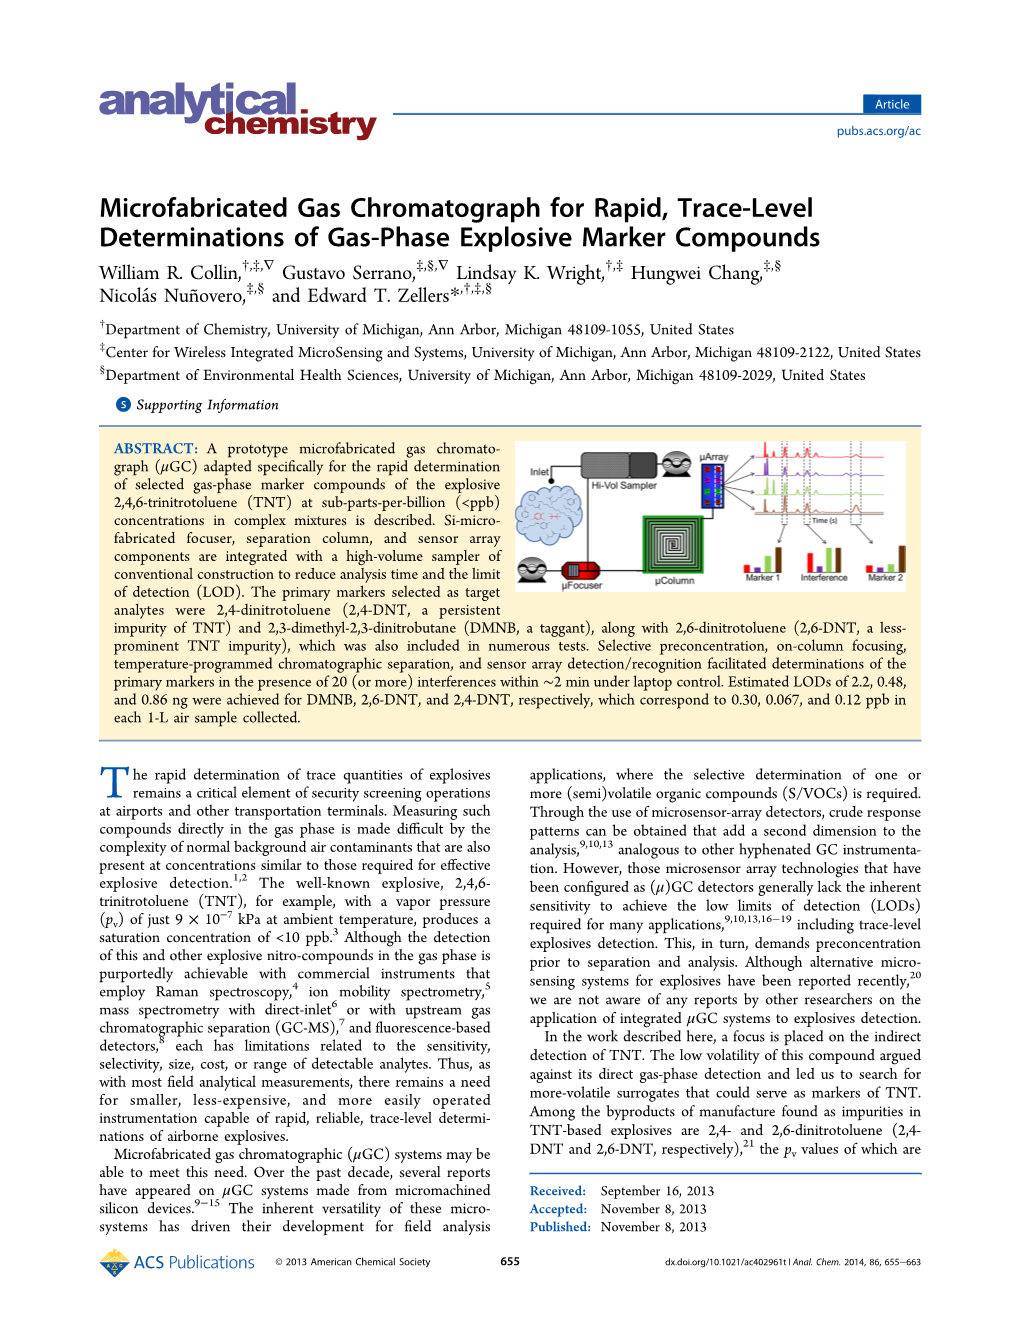 Microfabricated Gas Chromatograph for Rapid, Trace-Level Determinations of Gas-Phase Explosive Marker Compounds † ‡ ∇ ‡ § ∇ † ‡ ‡ § William R